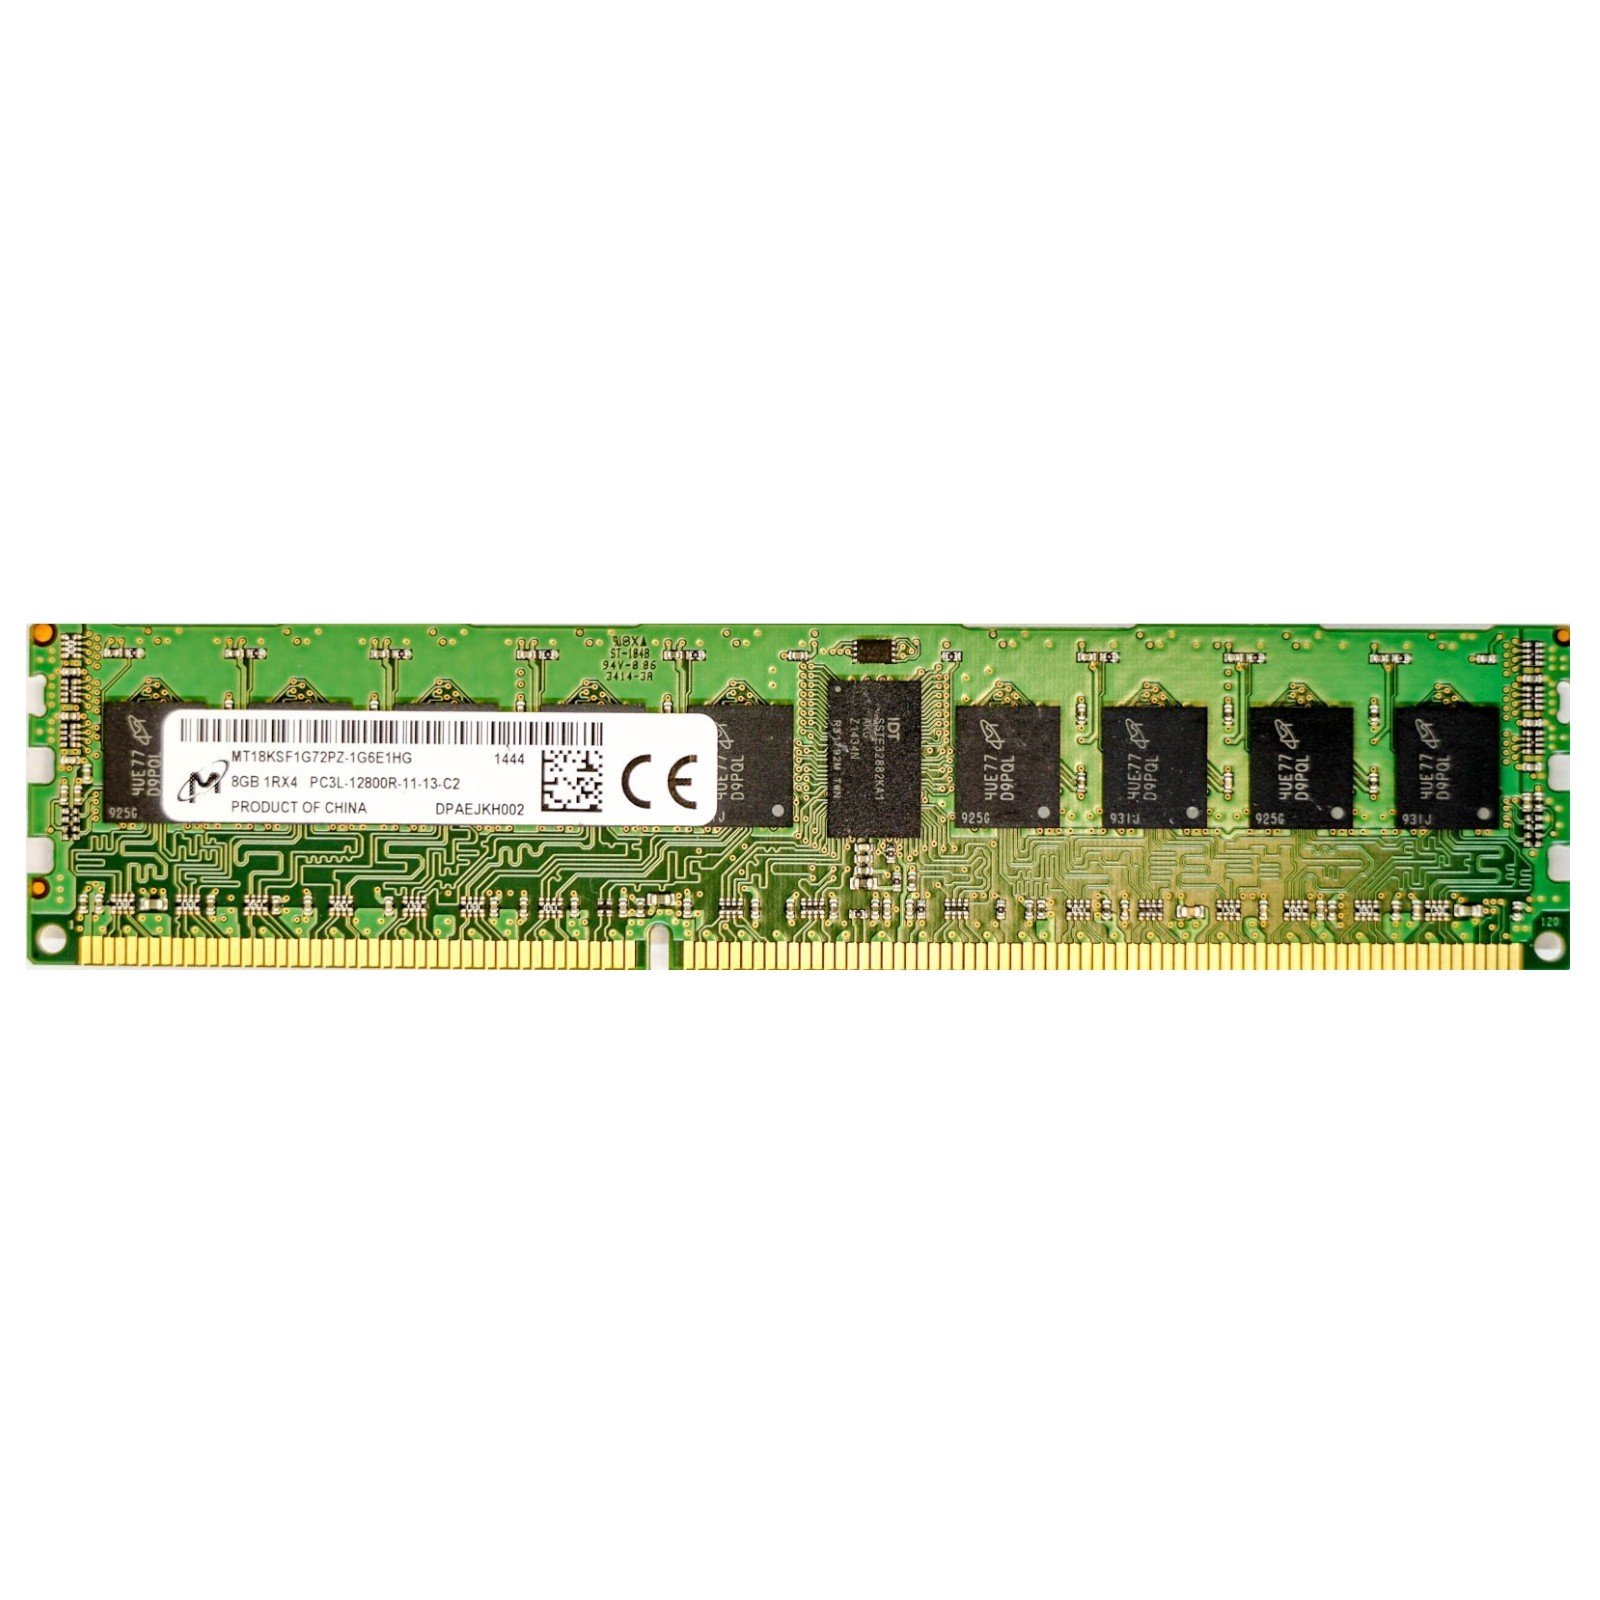 HP (731656-081) - 8GB PC3L-12800R (1RX4, 1600MHz) RAM - Front